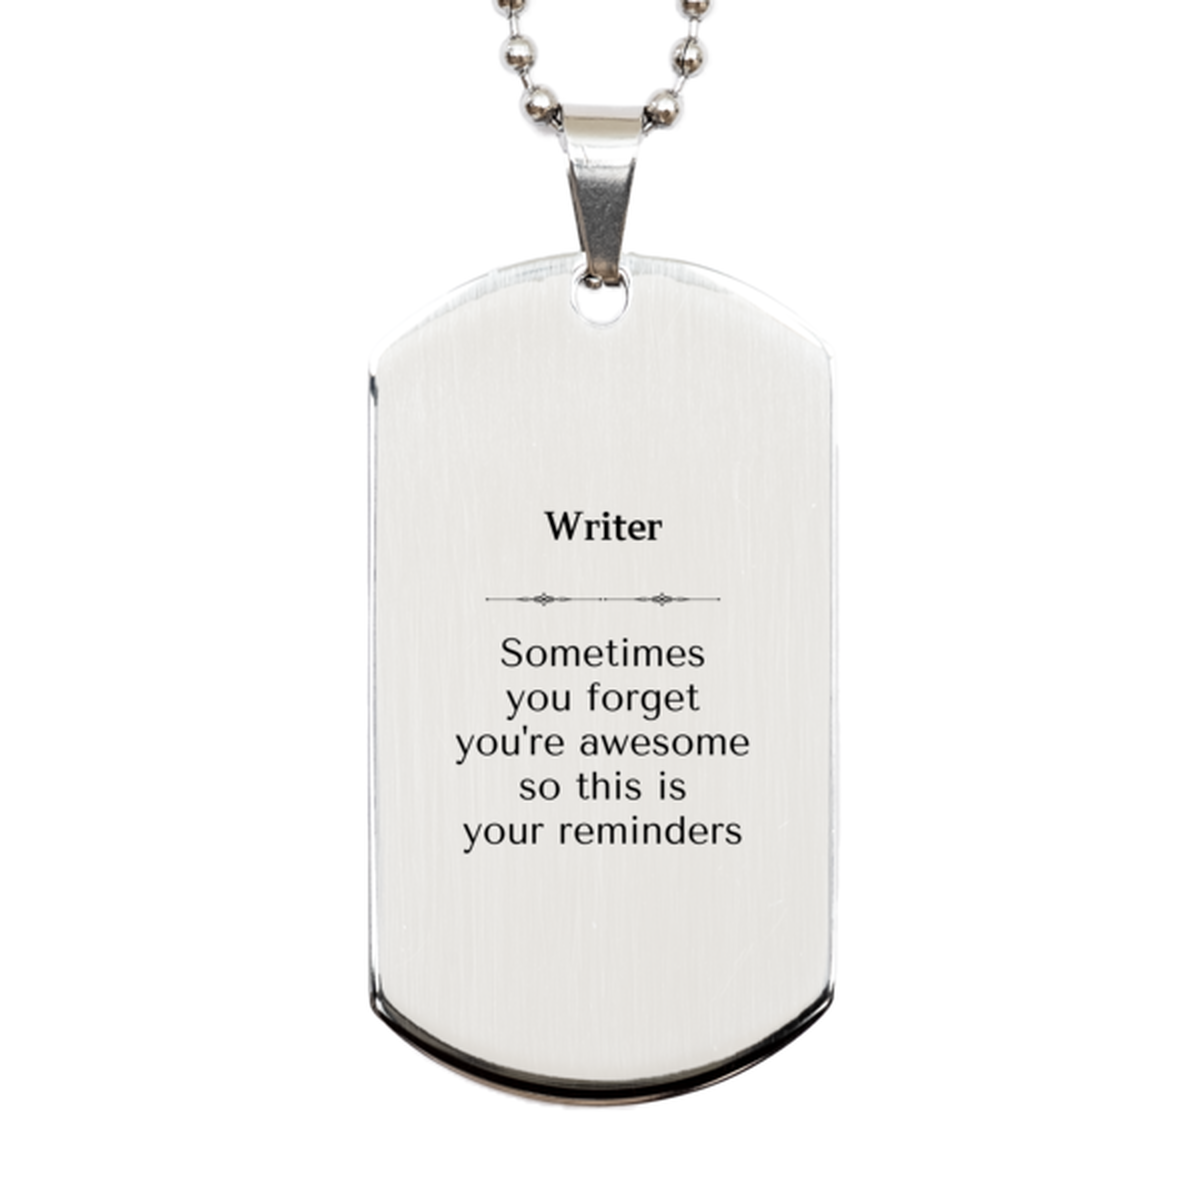 Sentimental Writer Silver Dog Tag, Writer Sometimes you forget you're awesome so this is your reminders, Graduation Christmas Birthday Gifts for Writer, Men, Women, Coworkers